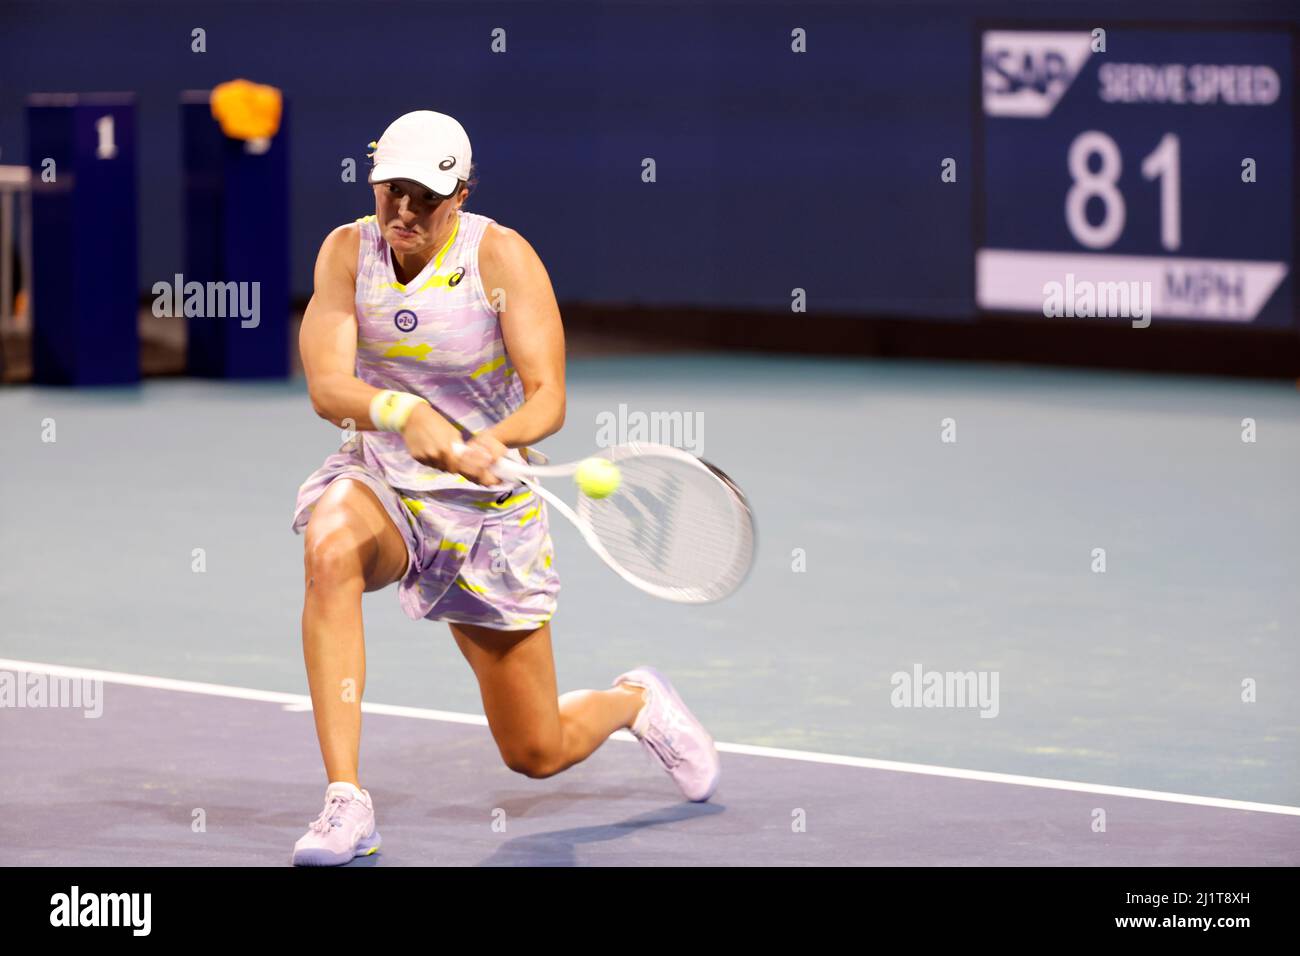 Miami Gardens, Florida, USA. 27th Mar, 2022. Iga Swiatek of Poland defeats Madison Brengle of United States during the 2022 Miami Open presented by Itaú at Hard Rock Stadium on March 27, 2022 in Miami Gardens, Florida People: Iga Swiatek Credit: Hoo Me/Media Punch/Alamy Live News Stock Photo